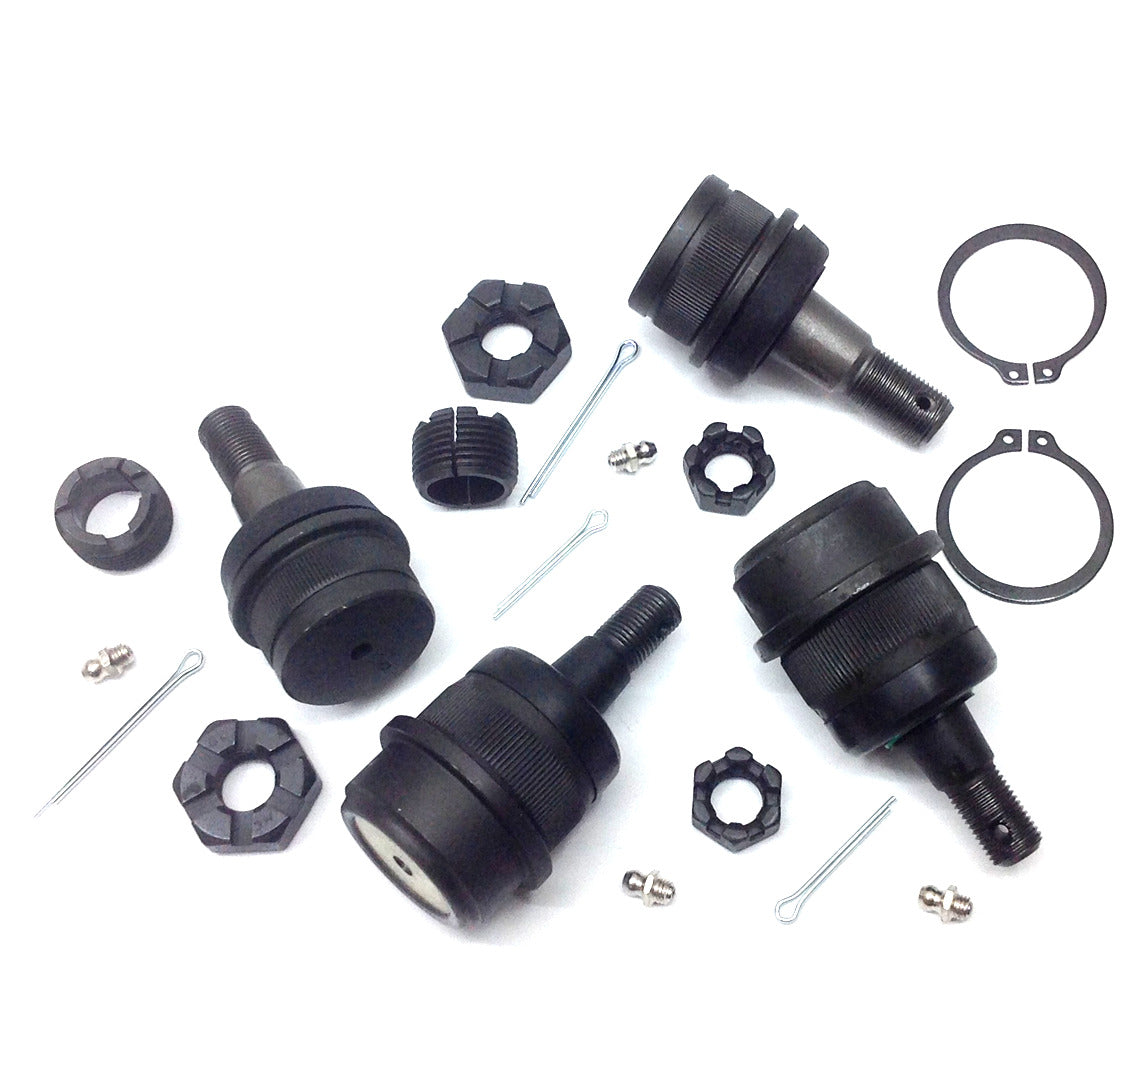 HD Ball Joint Kit for 1999-2004 Grand Cherokee